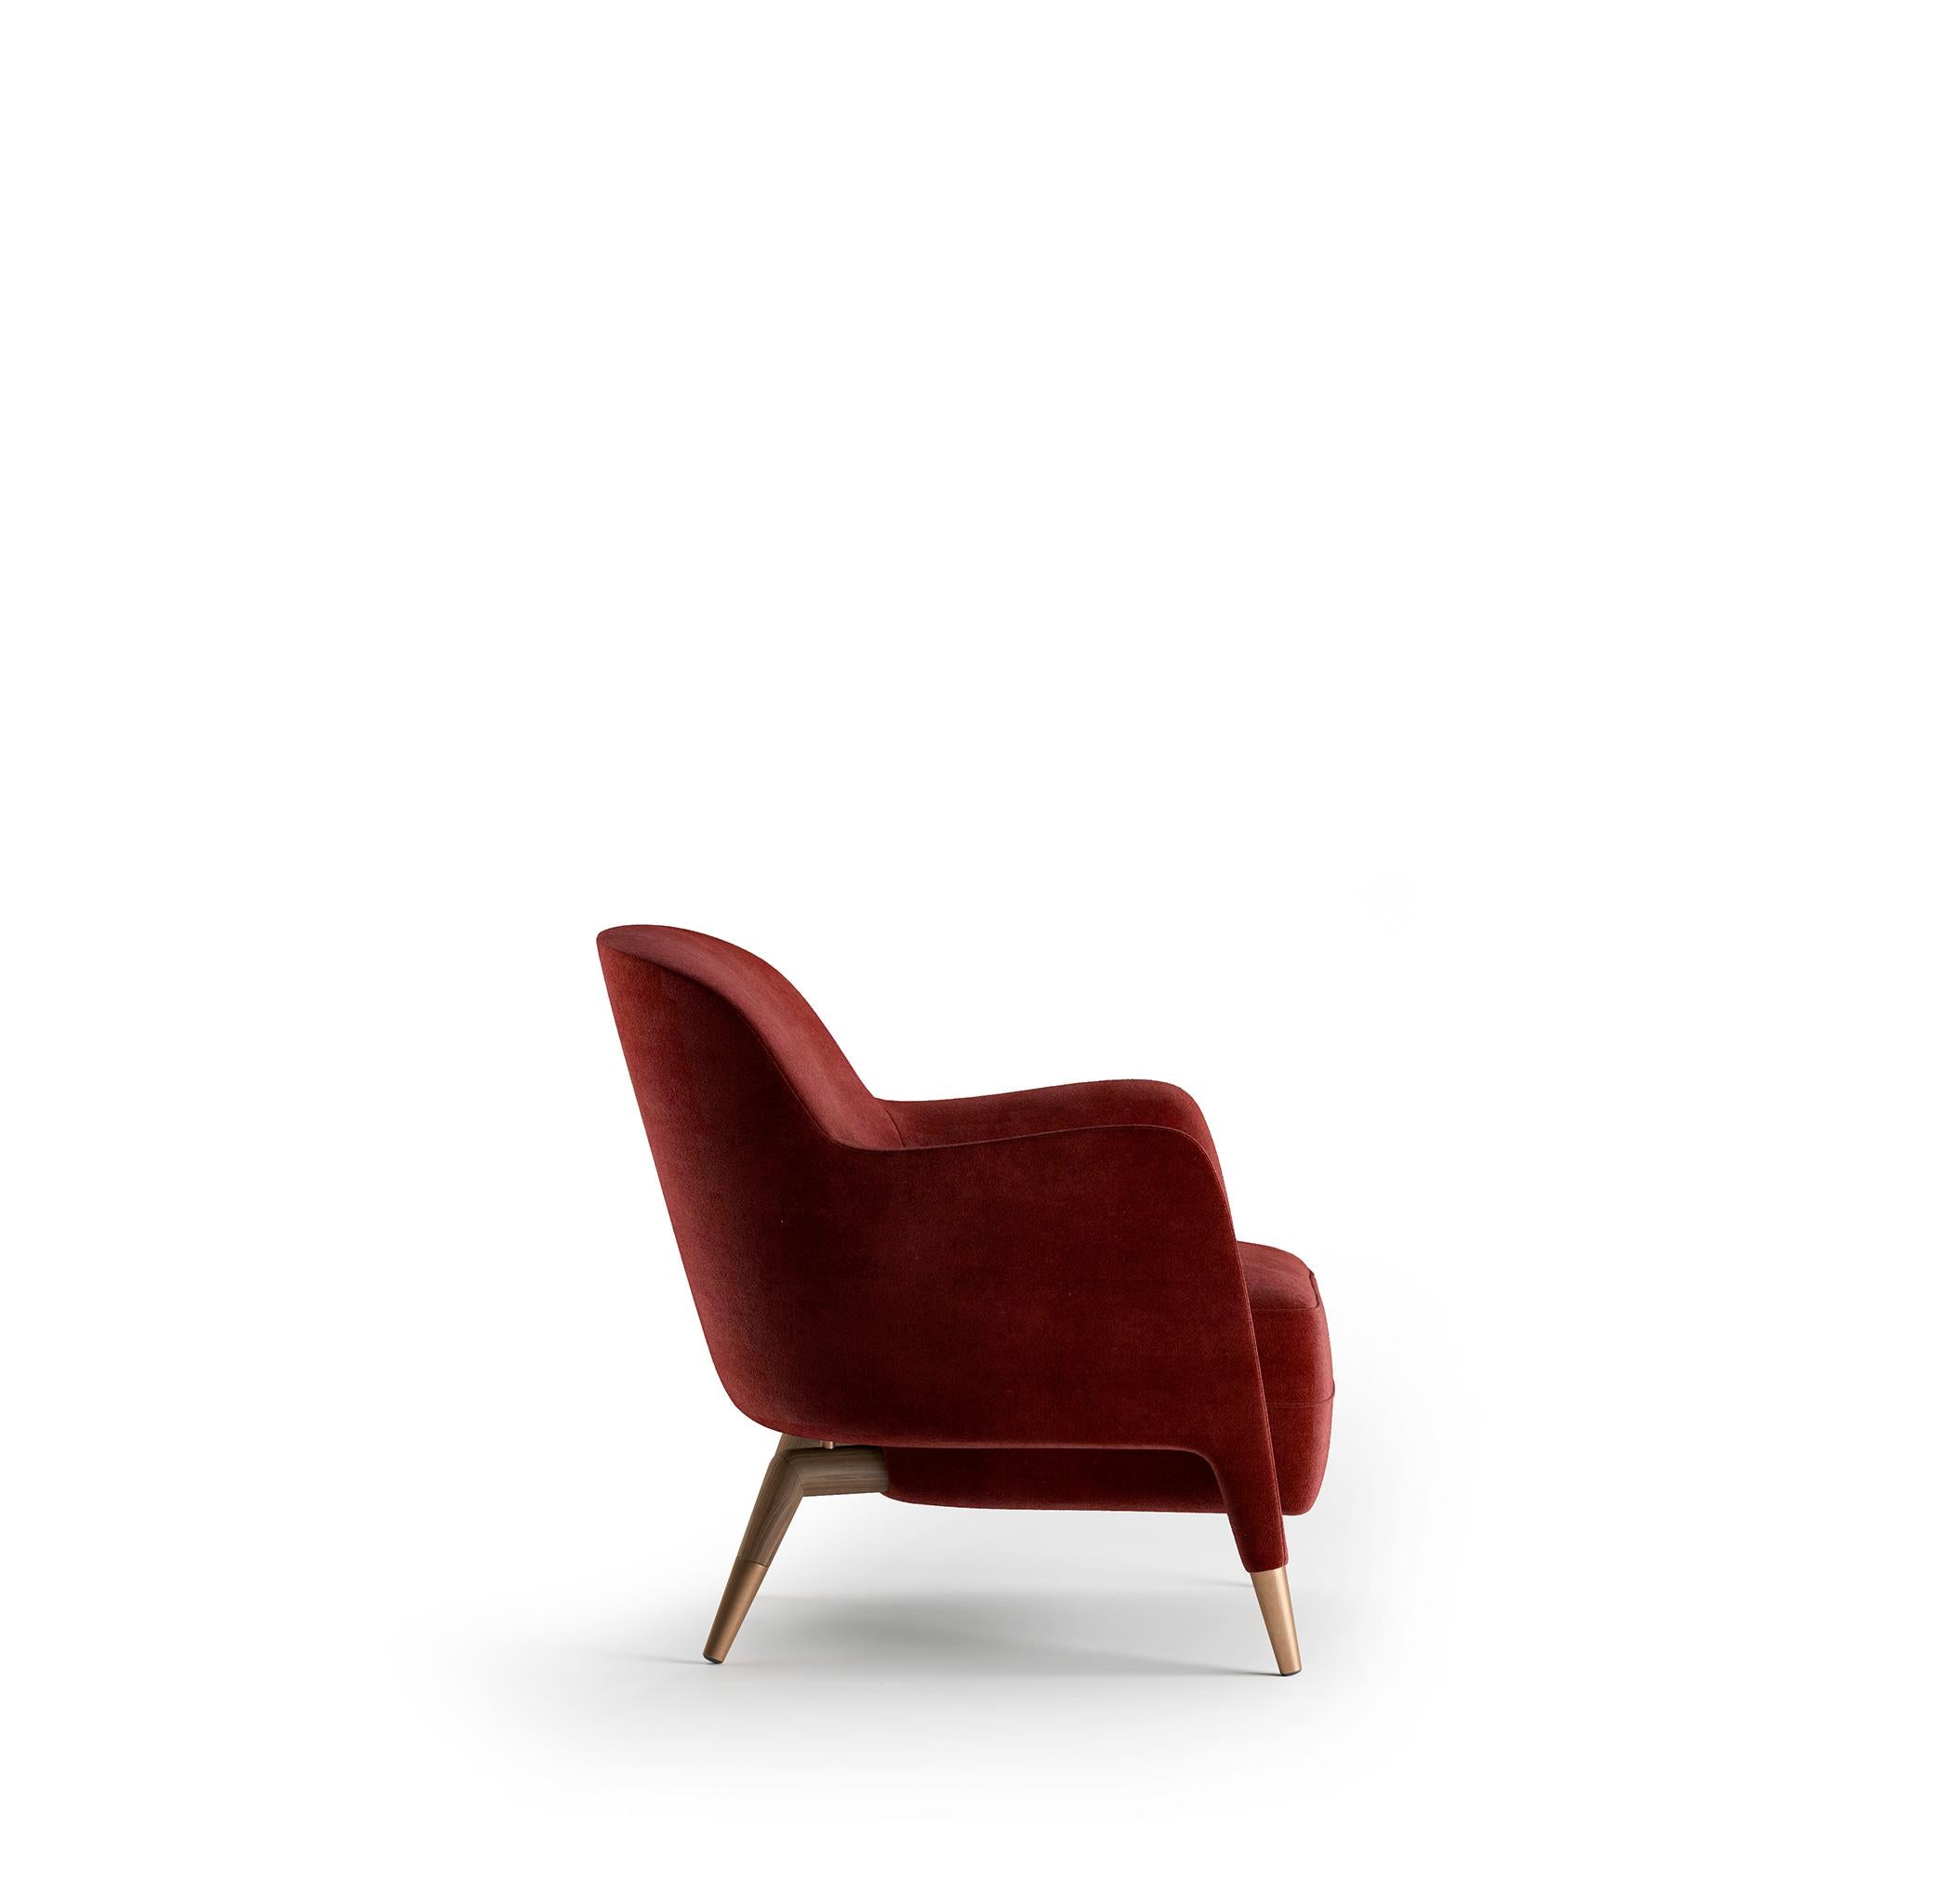 D.151.4 armchair in wear linen by Gio Ponti - Expert-crafted in Italy by Molteni&C 

Gio Ponti leaned on nautical inspiration to design this armchair that was destined for use on ocean liners and today is a part of Molteni&C's Heritage Collection.